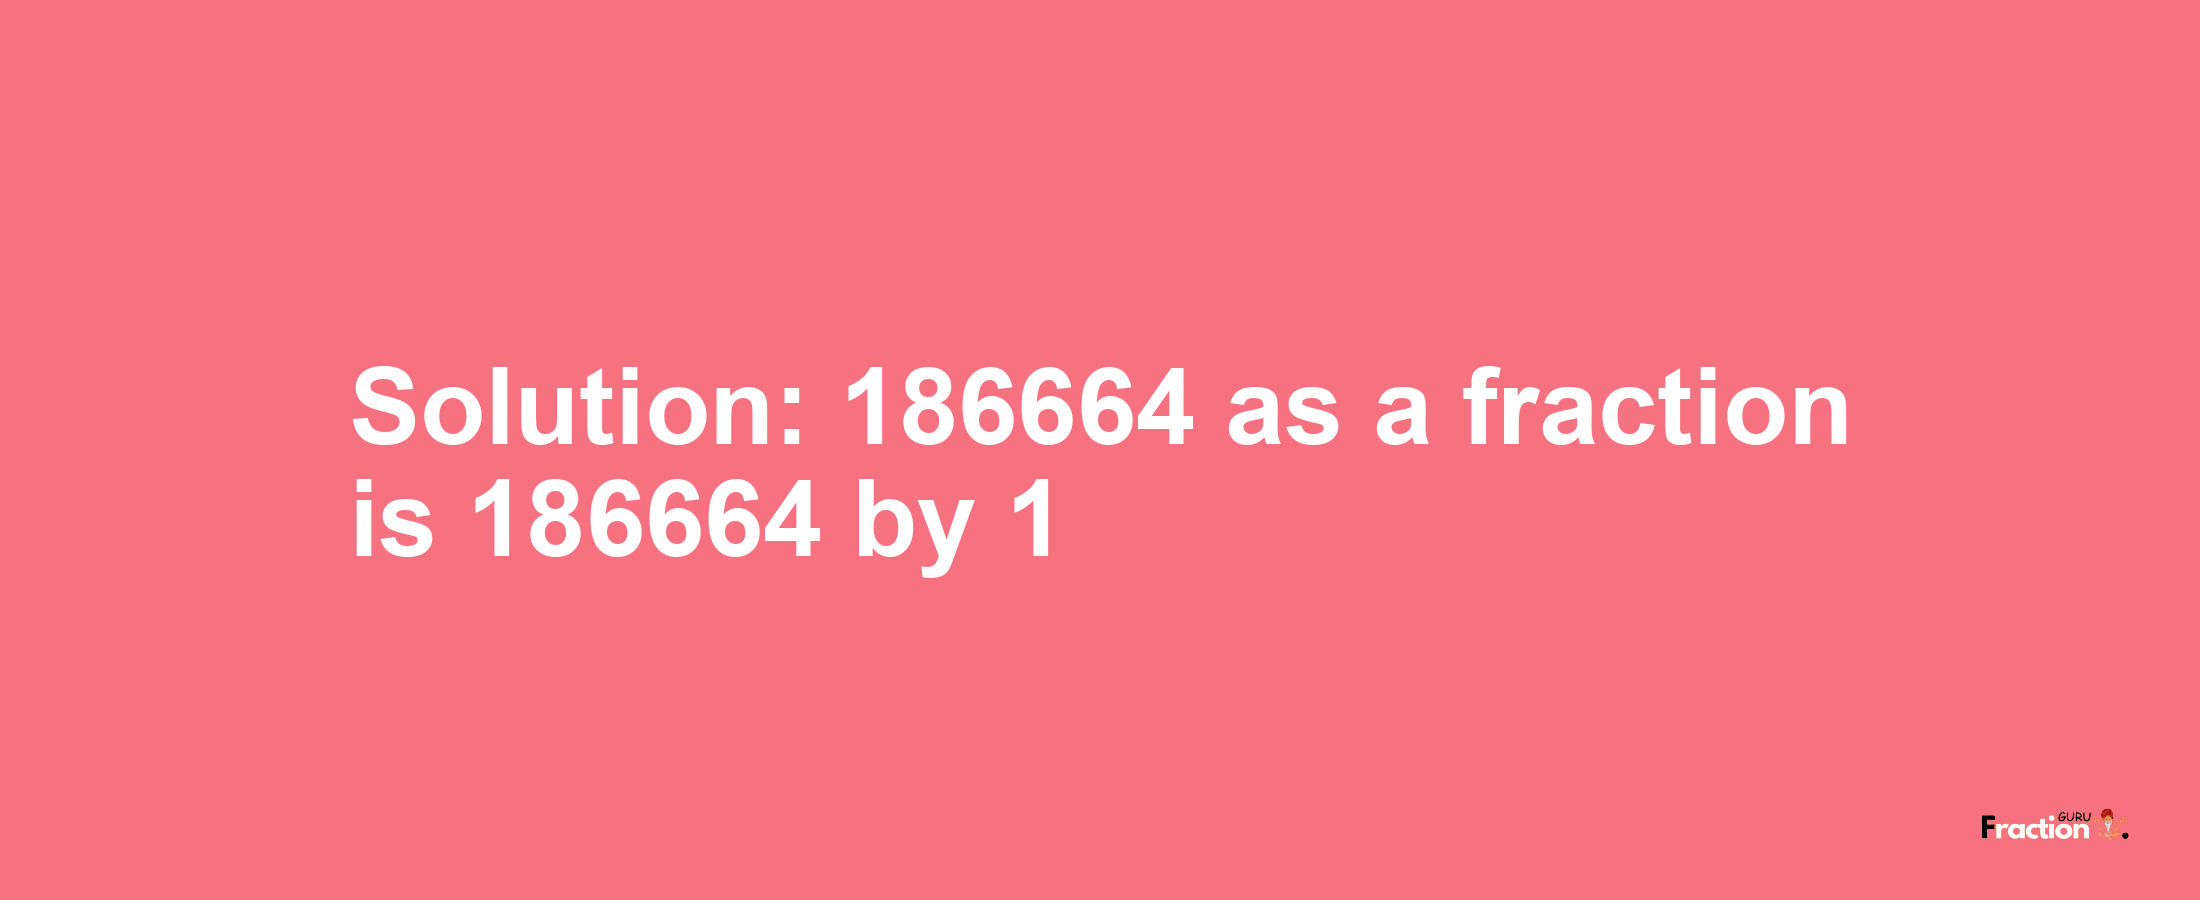 Solution:186664 as a fraction is 186664/1